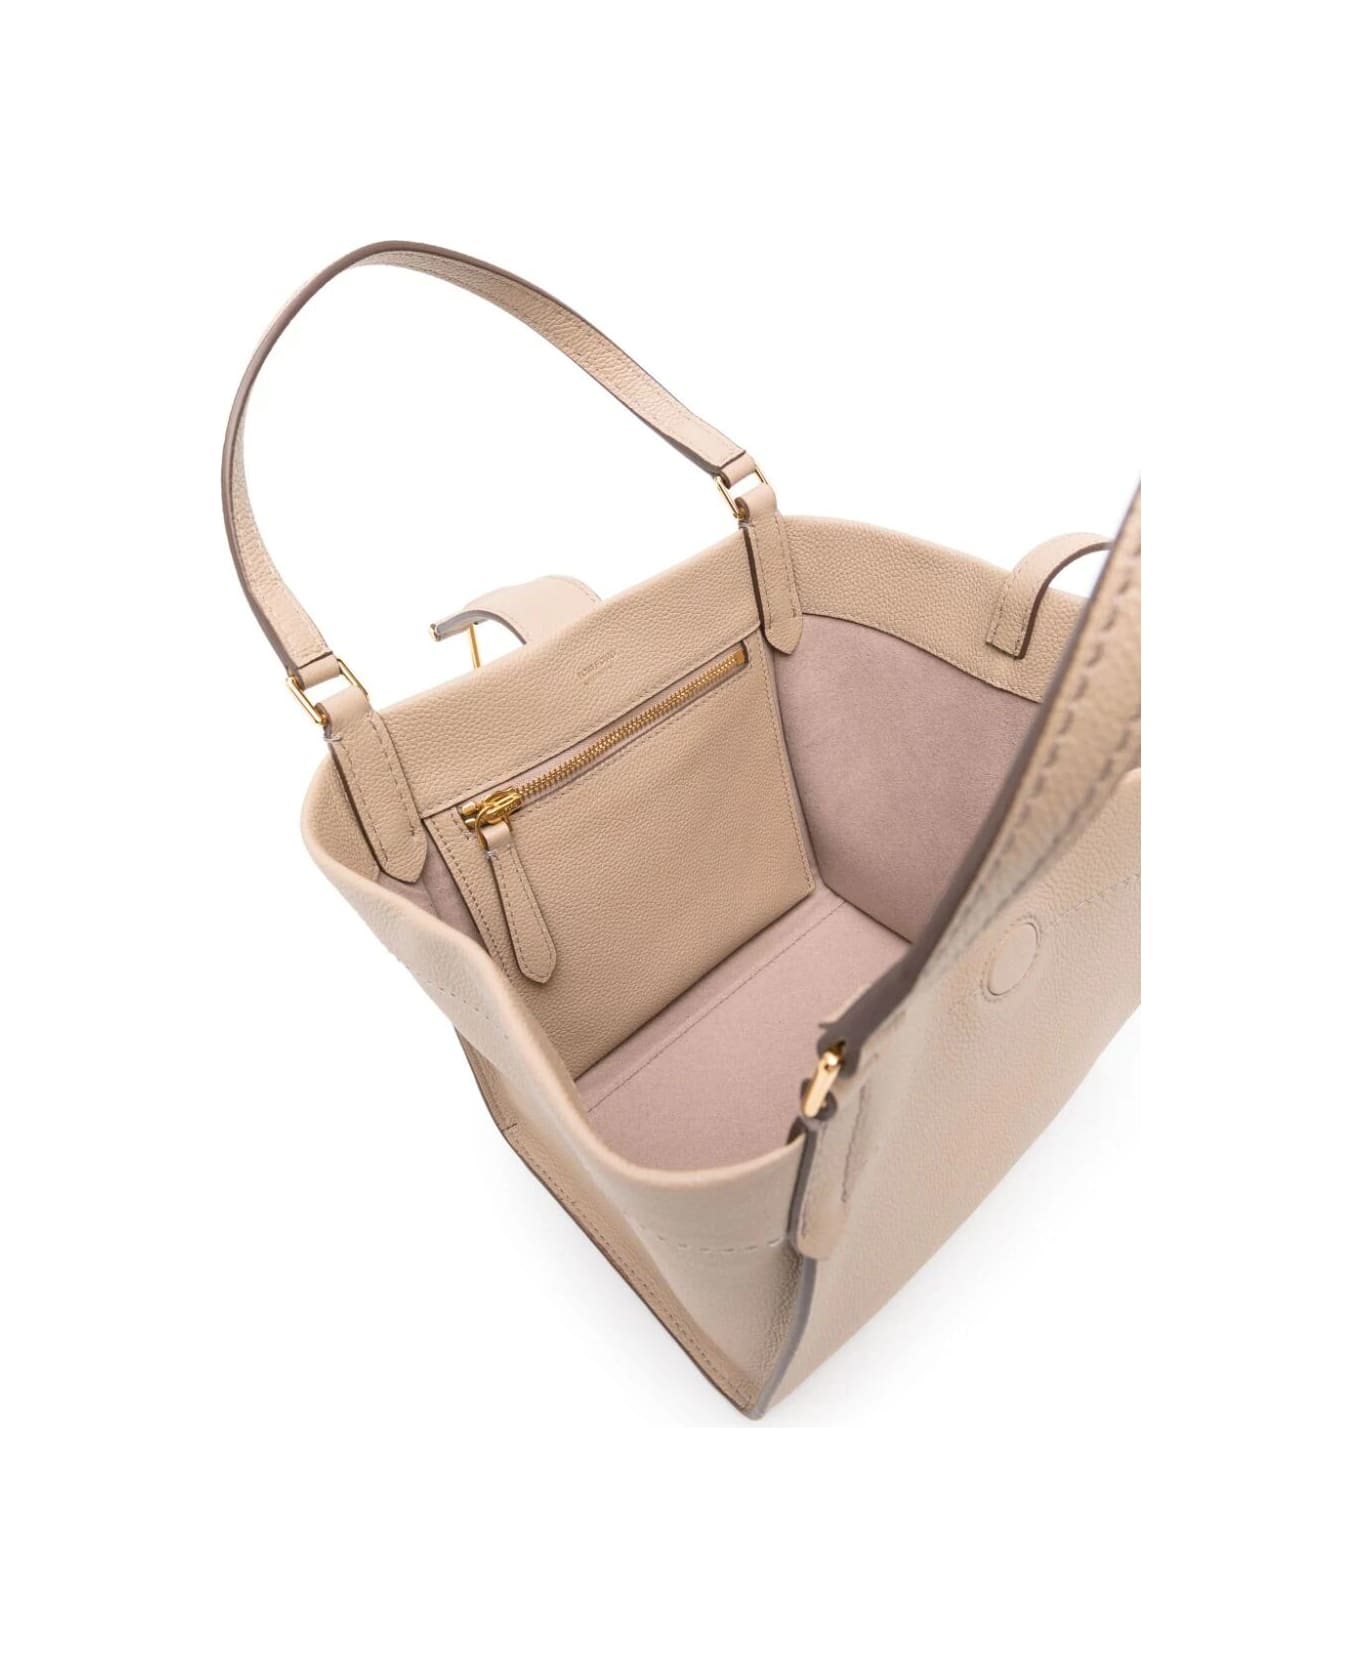 Tom Ford Grain Leather Small Tote - Silk Taupe